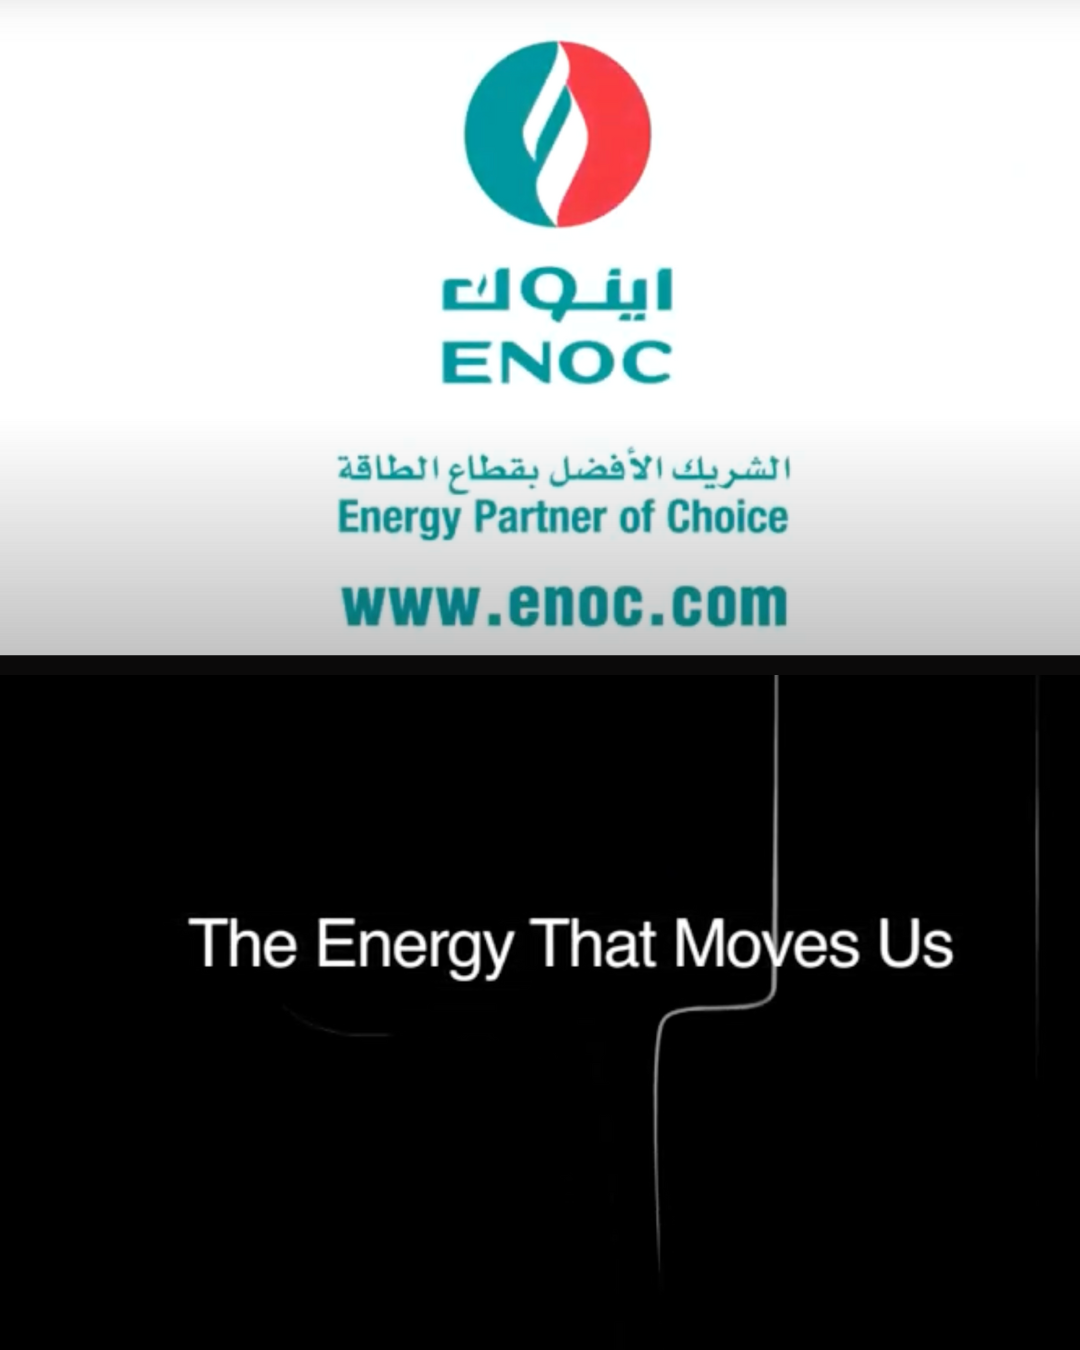 Emirates National Oil Company (ENOC) touching lives